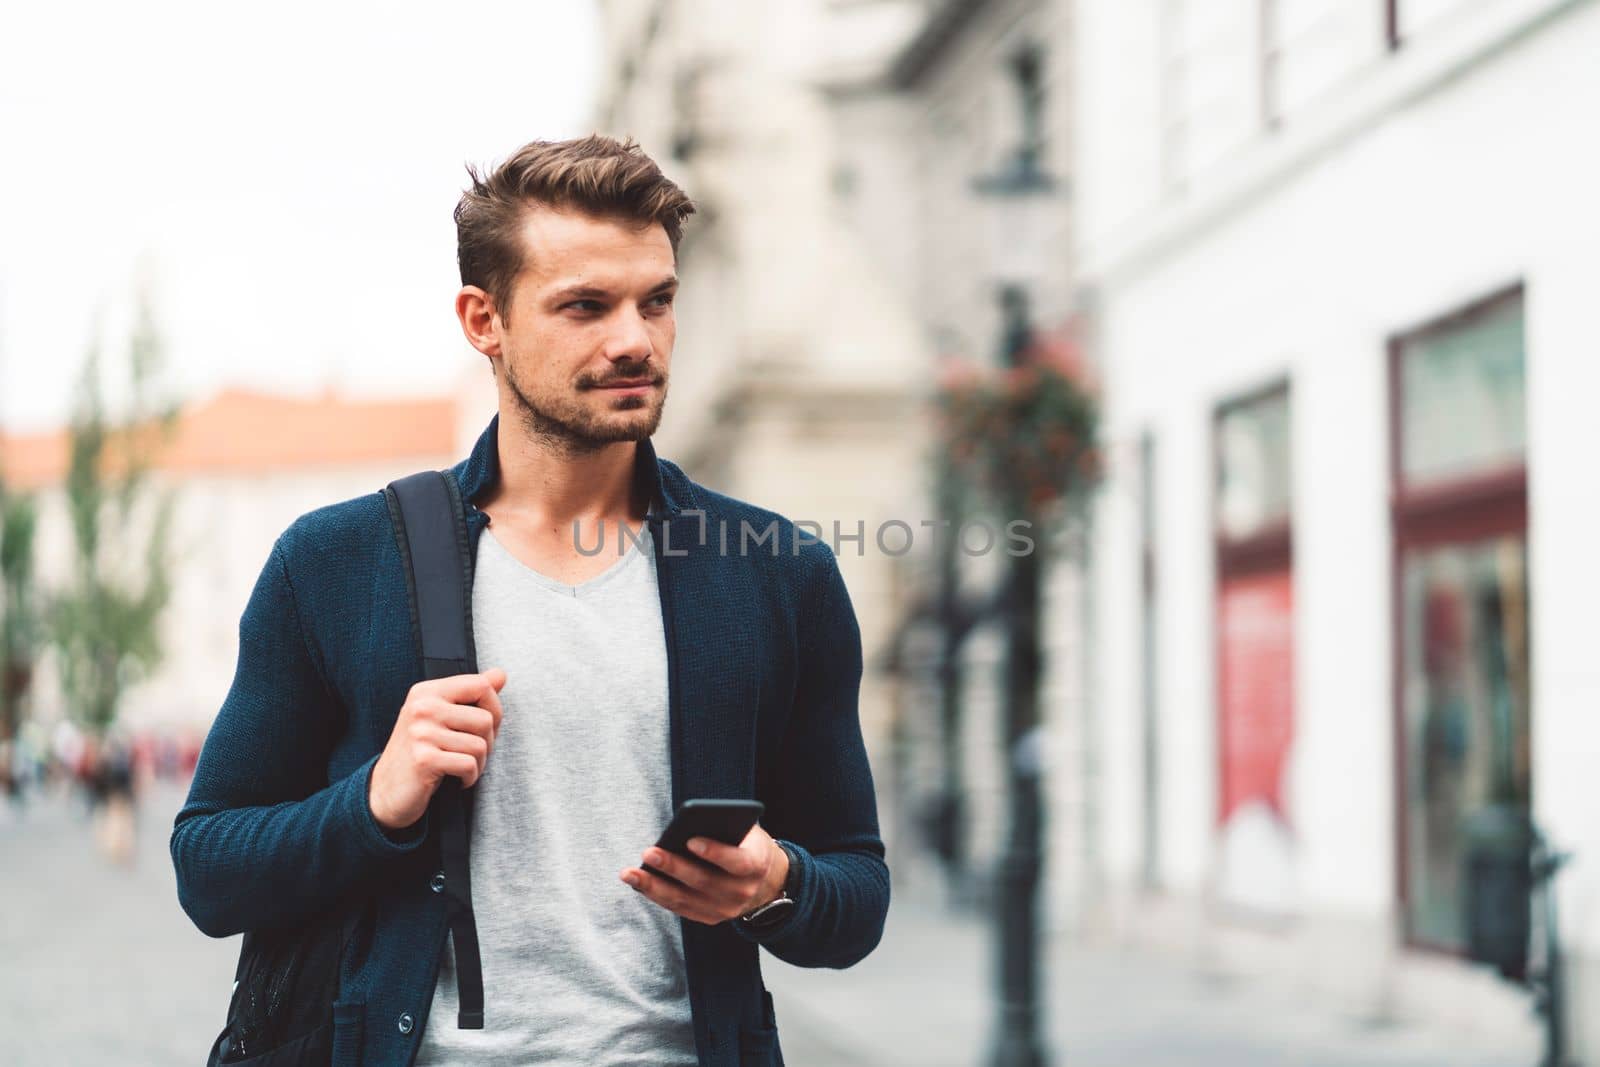 Wait up portrait of caucasian bearded man walking around the city with a phone in his hands by VisualProductions